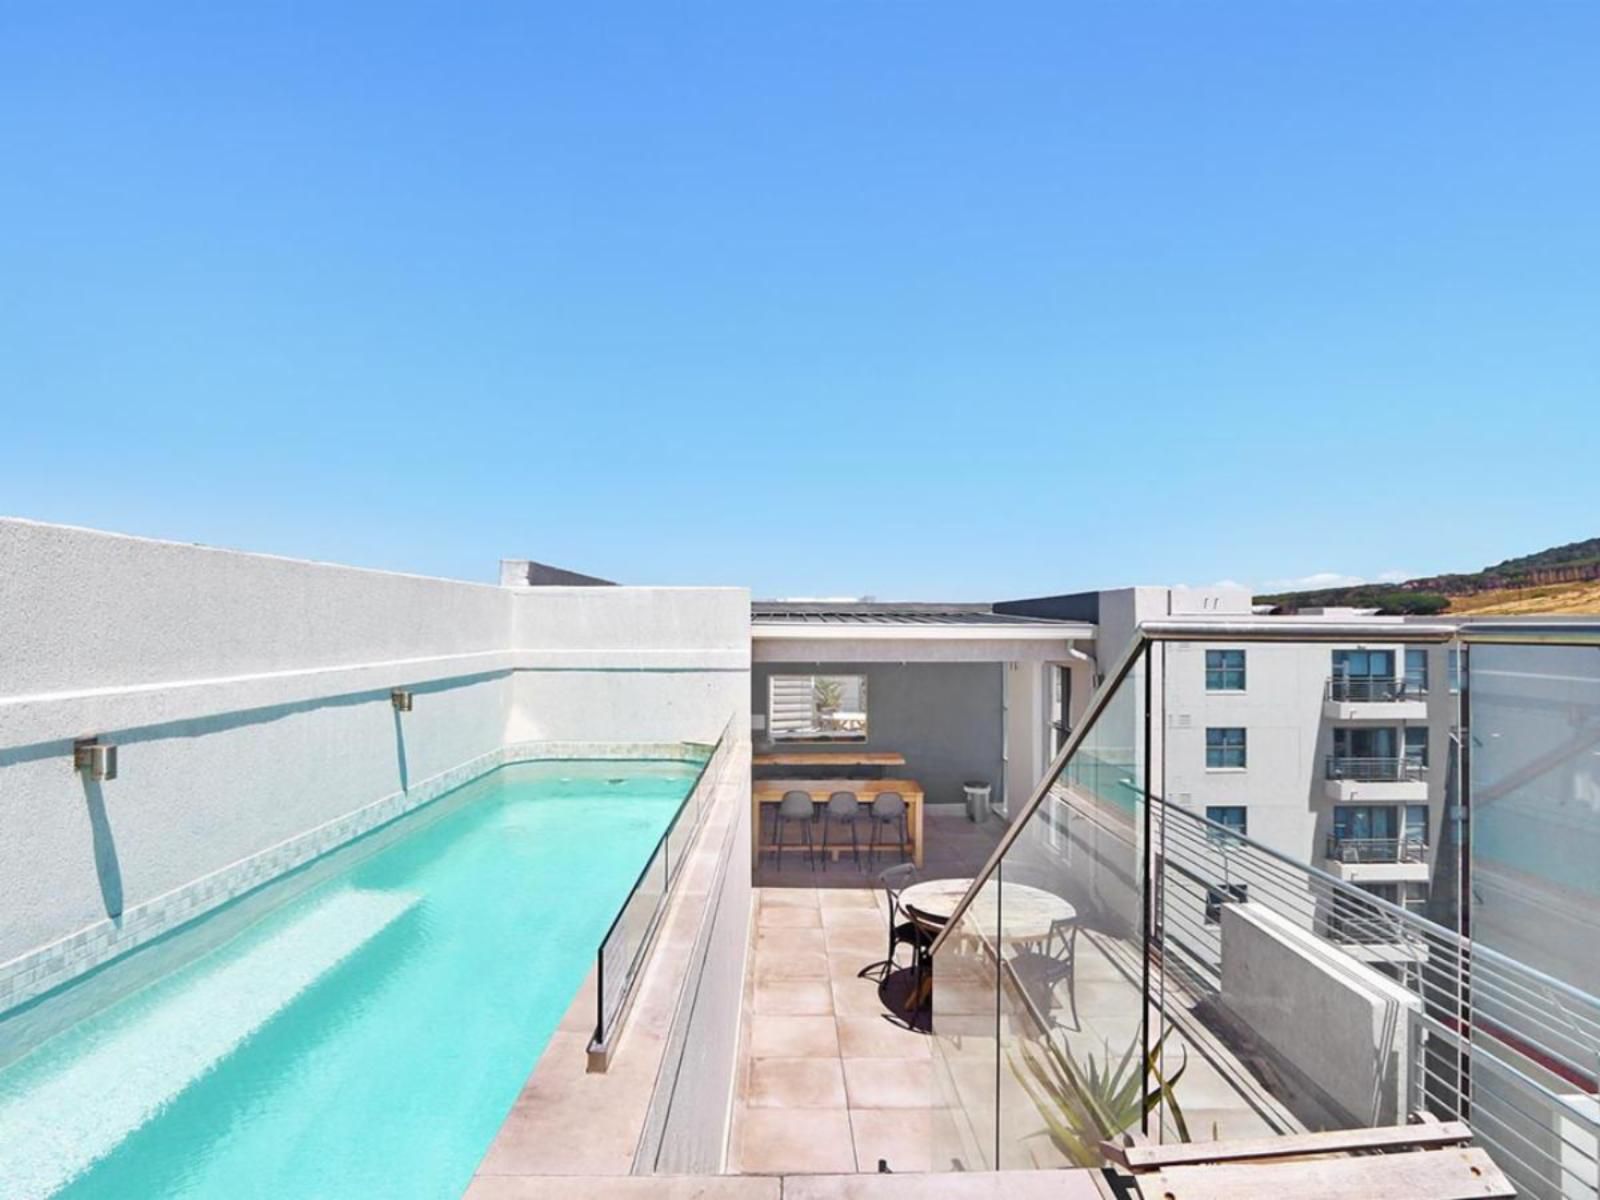 The Paragon 317 By Hostagents Observatory Cape Town Western Cape South Africa House, Building, Architecture, Swimming Pool